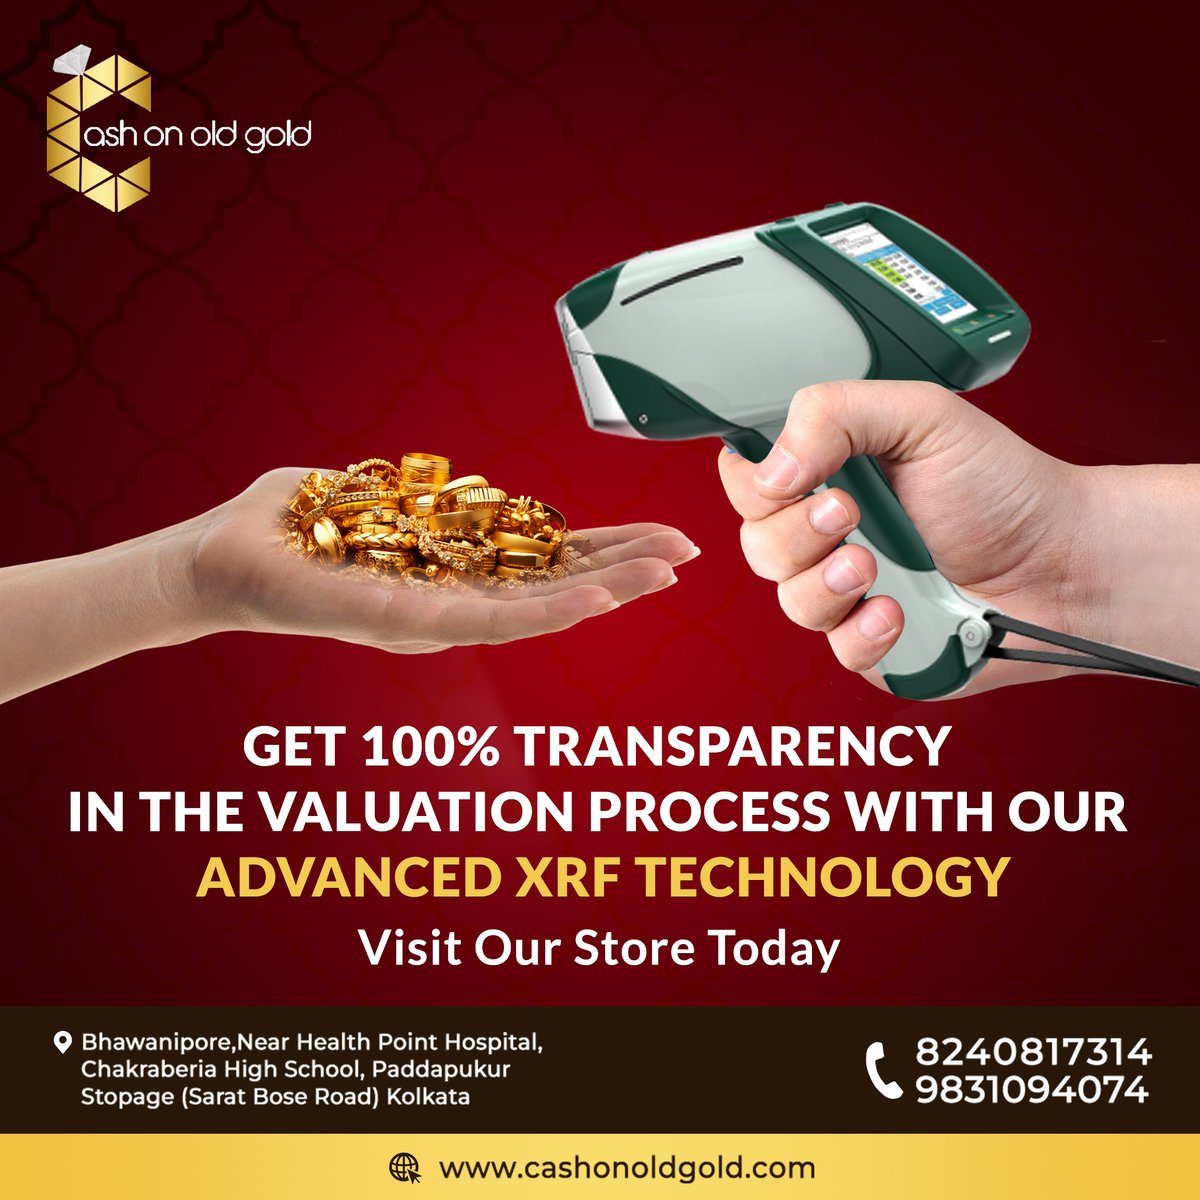 At Cash on Old Gold, we provide 100% transparency during the valuation process with our advanced XRF technology. Reach out to us today.

#CashOnOldGold #OldJewelleryBuyer #jewellerydesign #SellGold #GoldFacts #Goldenoppetunity #InstantCash